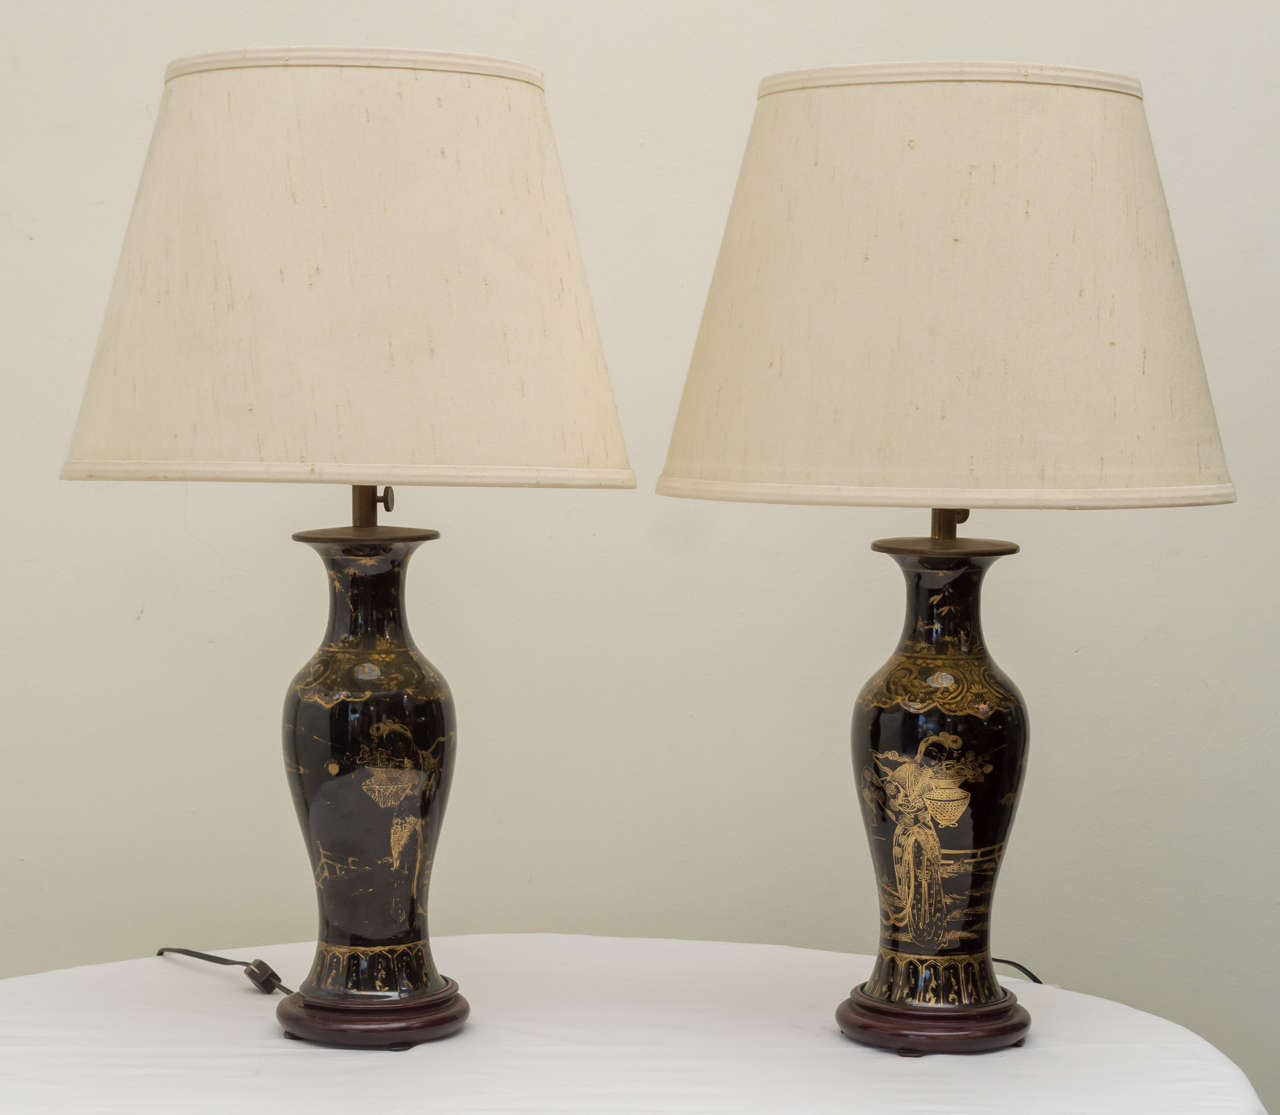 Pair of late Quig Period mirror black porcelain baluster form vases as lamps. Gold gilt decoration. Custom adjusting height, 2 light cluster and wood bases. Older custom worn silk shades. Overall height 24.5 inches, shade is 14inches in  diameter.